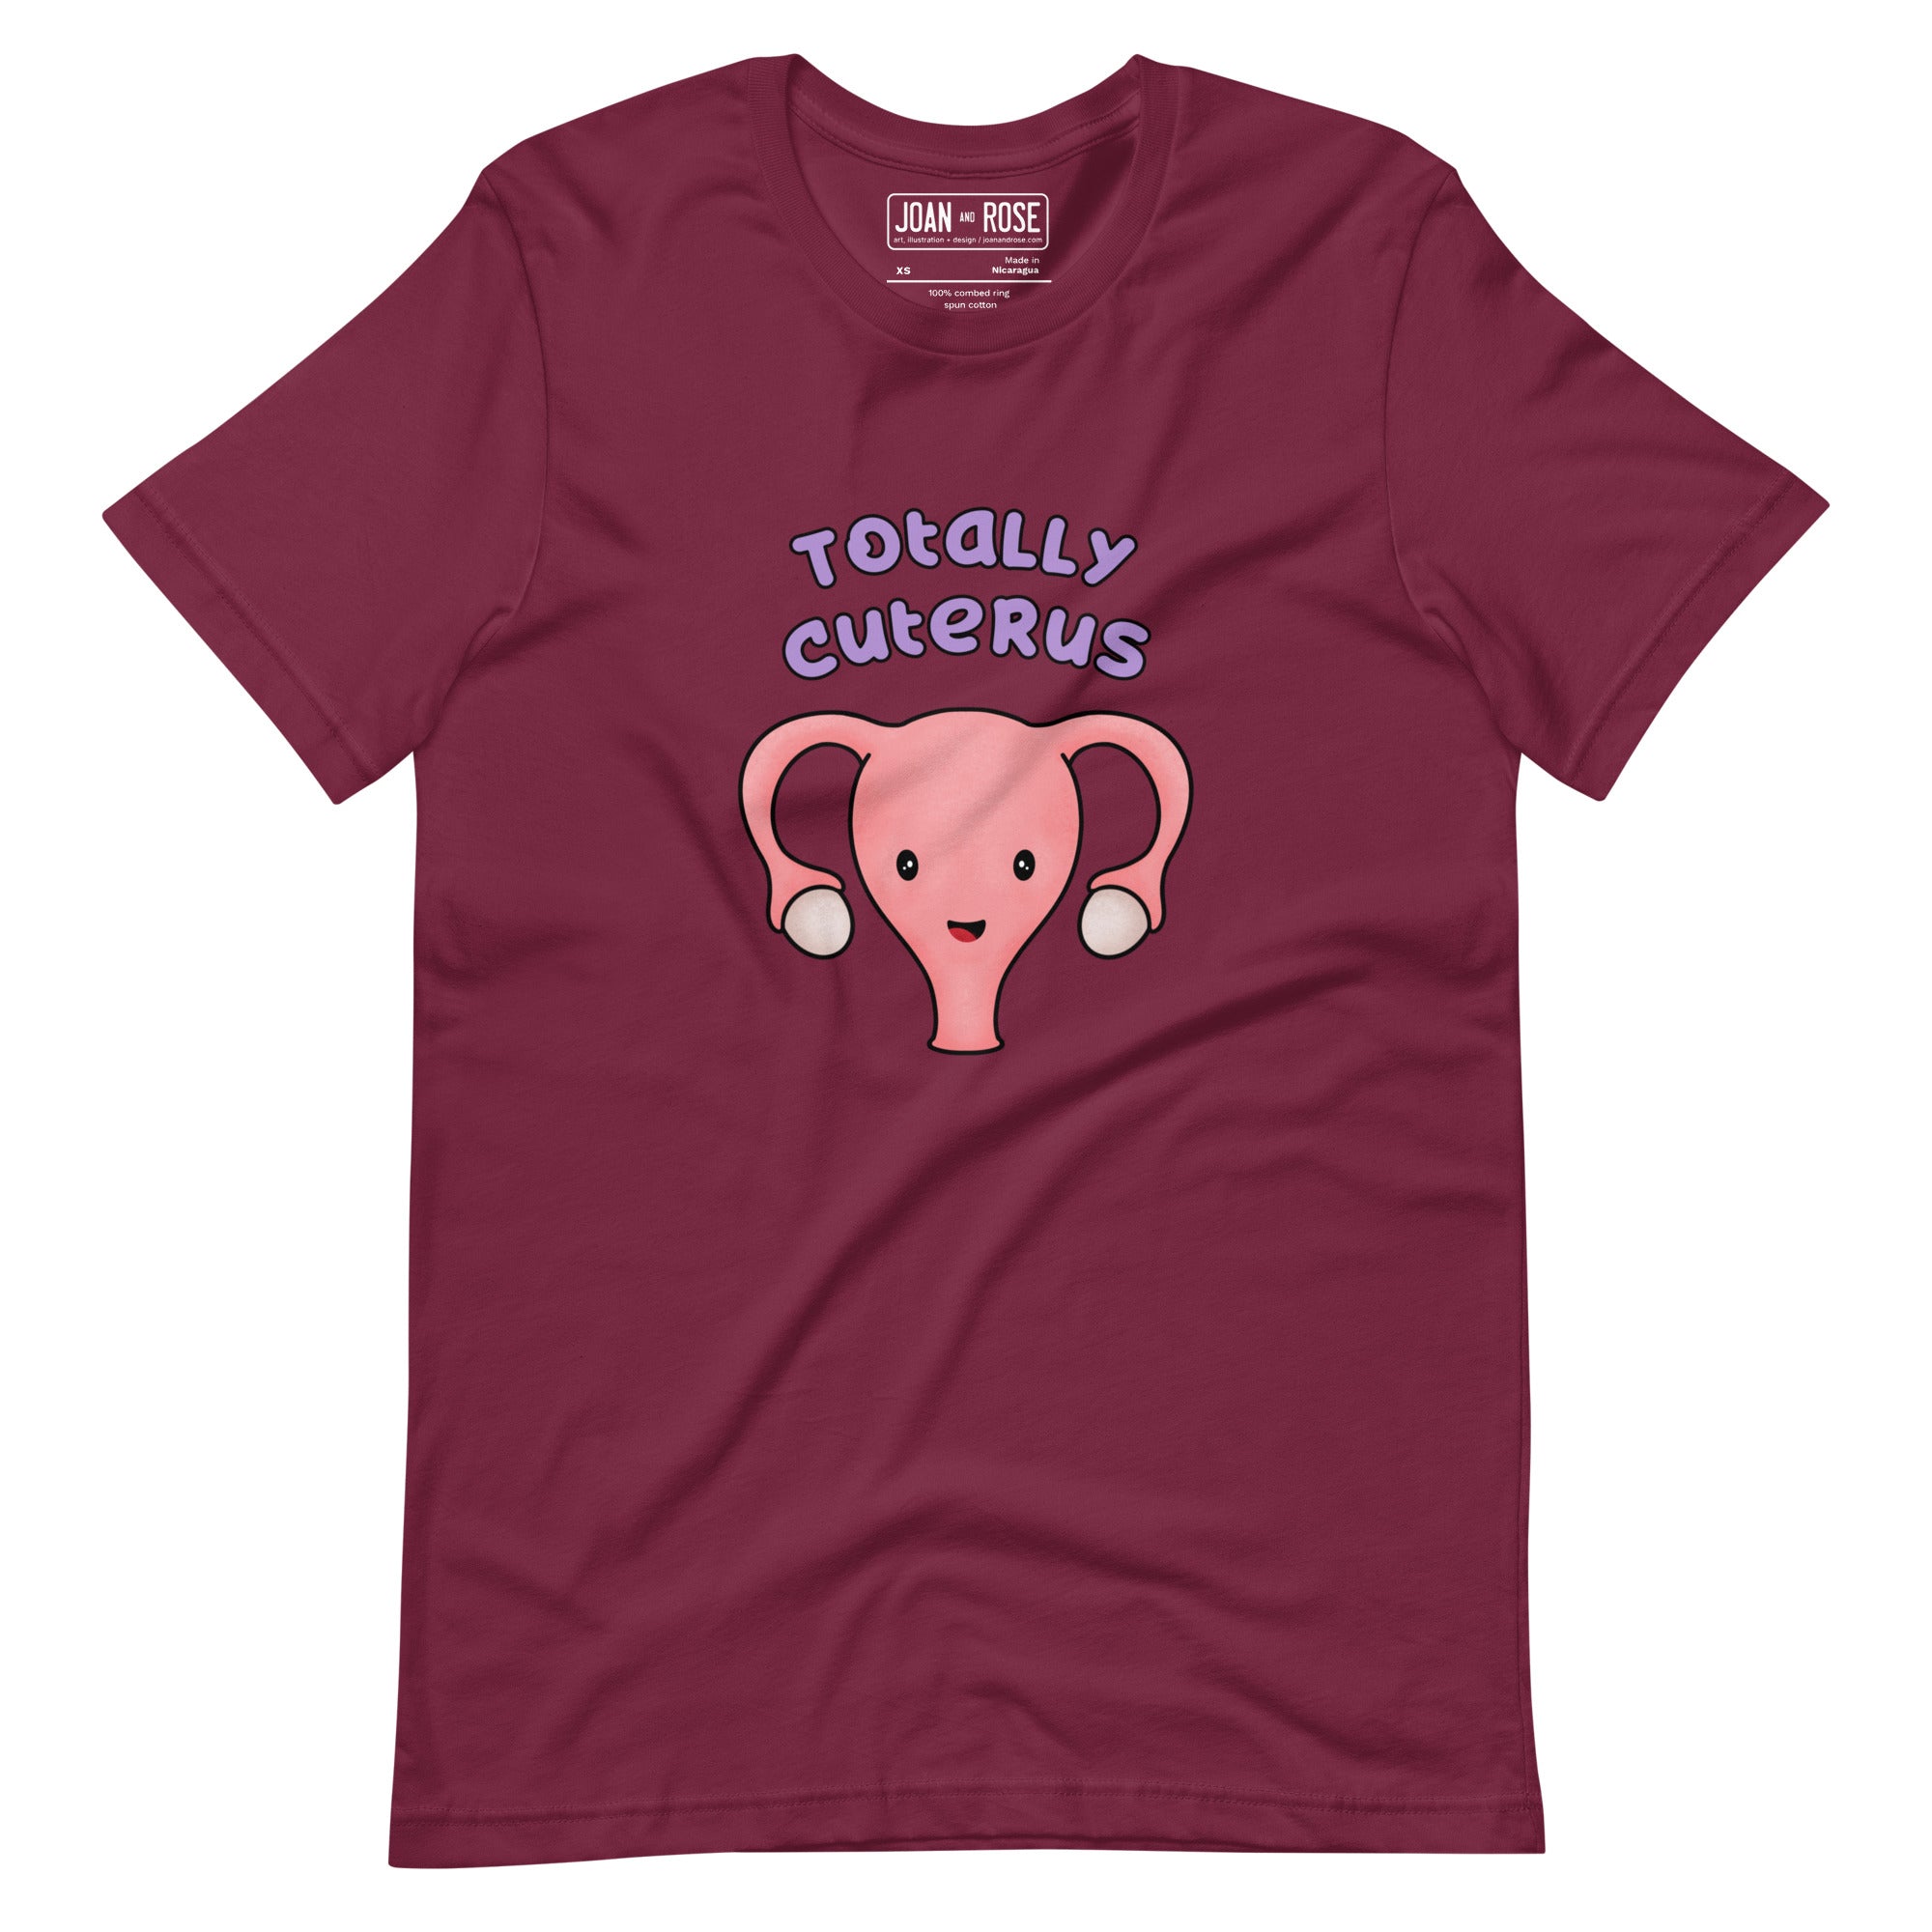 Maroon coloured  t-shirt with an illustration of a cute uterus character smiling with the text in purple 'Totally Cuterus'